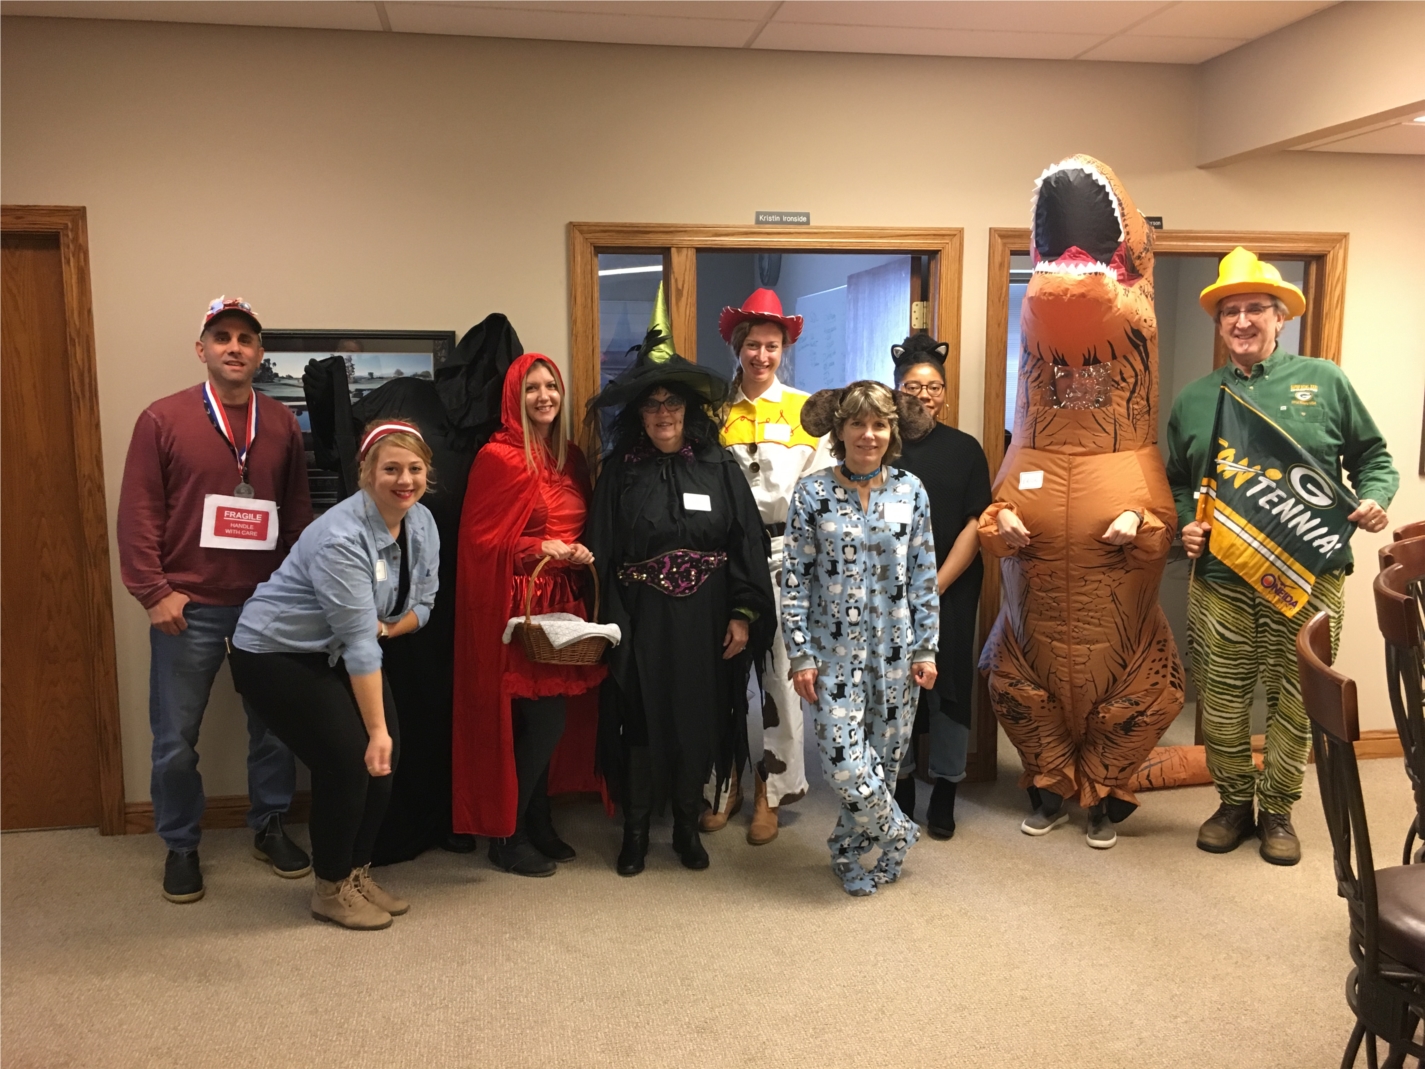 WorkWise Halloween Party for United Way Campaign